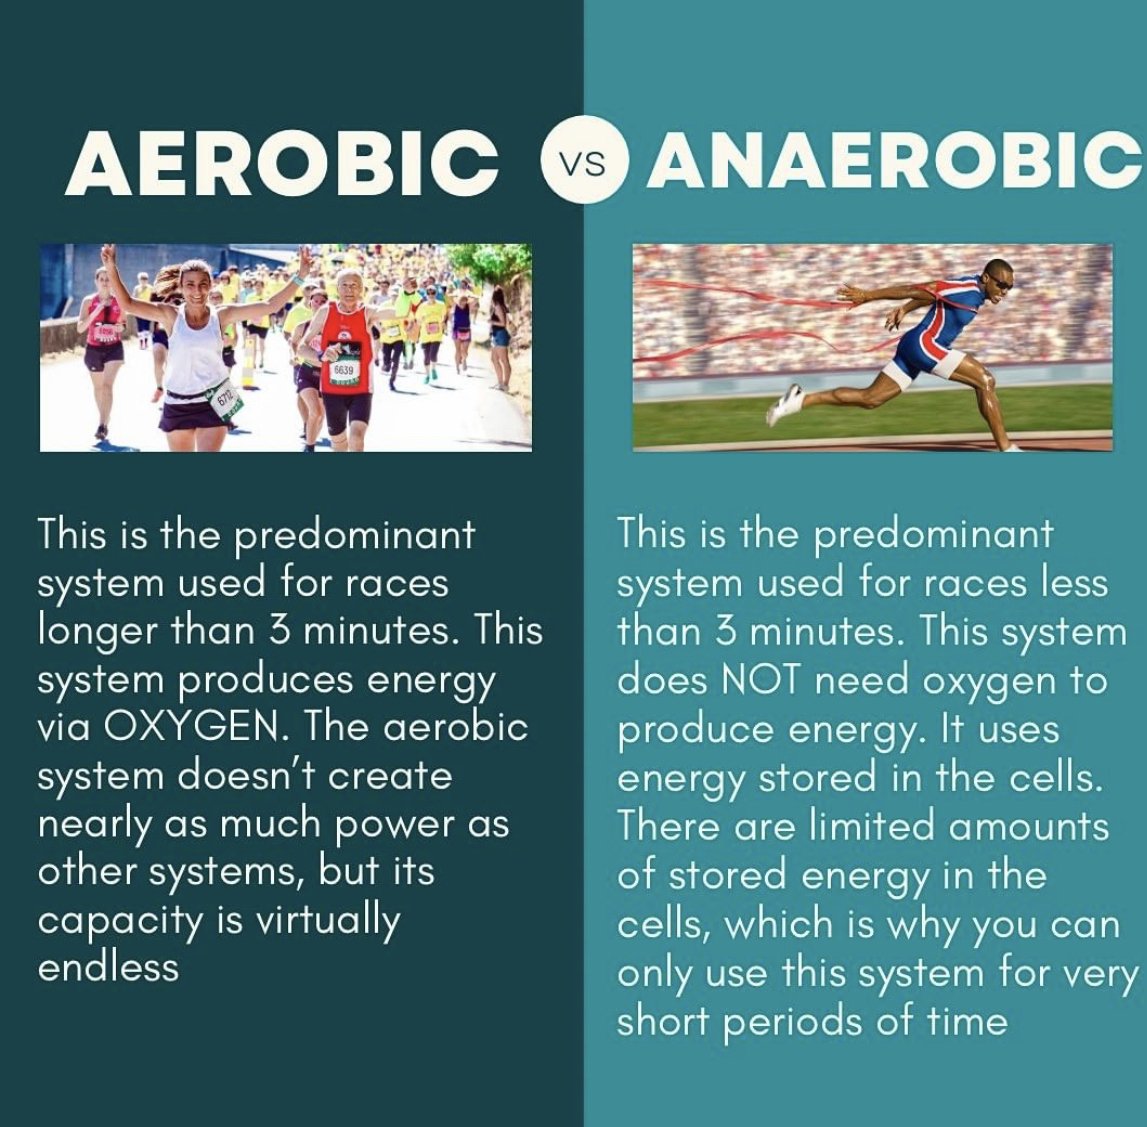 Aerobic vs. Anaerobic Exercise: Which is Better?